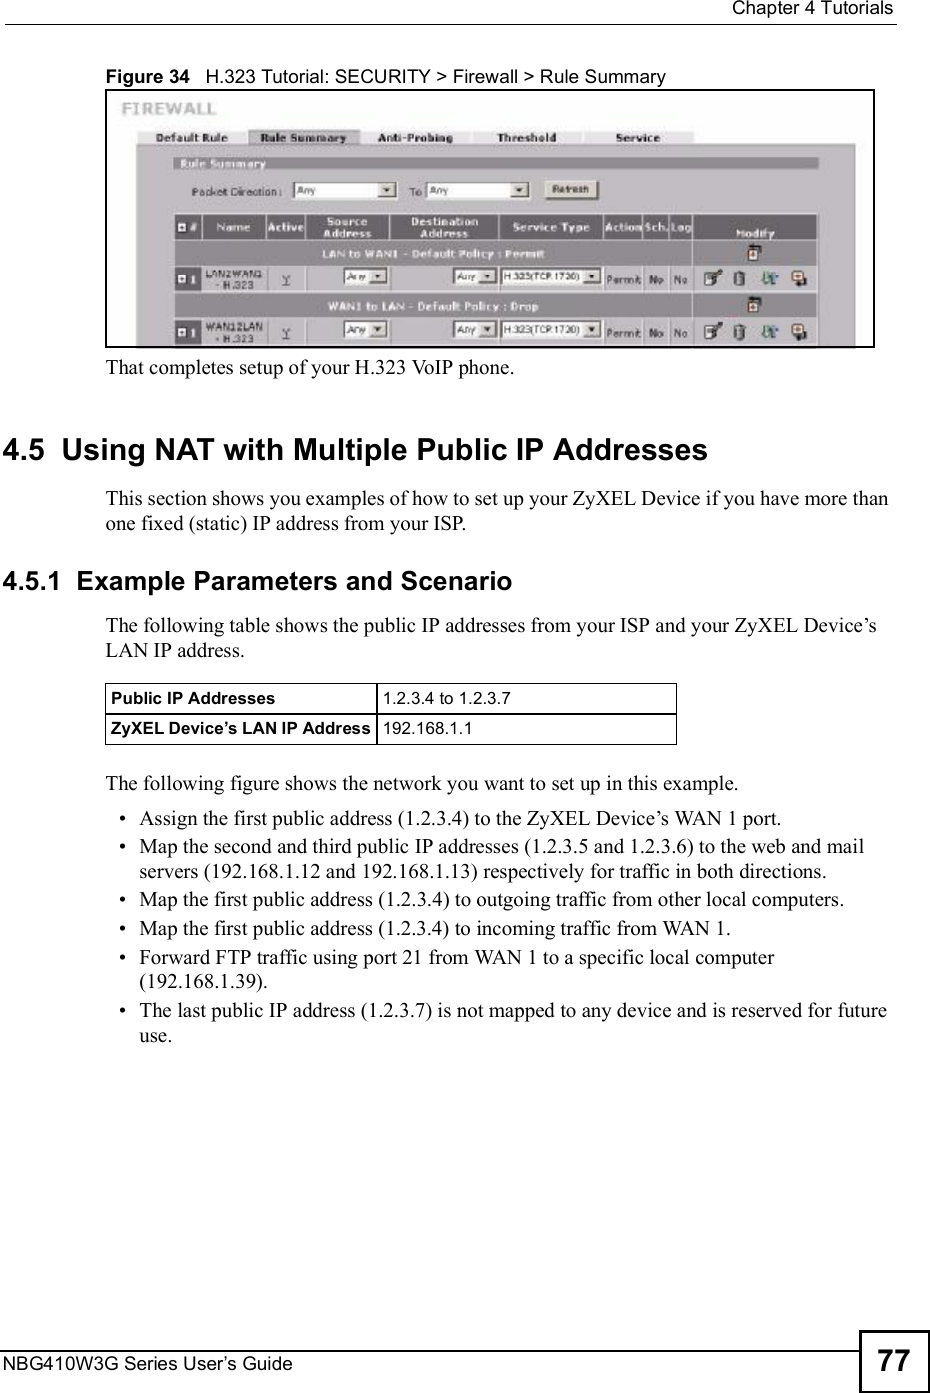  Chapter 4TutorialsNBG410W3G Series User s Guide 77Figure 34   H.323 Tutorial: SECURITY &gt; Firewall &gt; Rule SummaryThat completes setup of your H.323 VoIP phone.4.5  Using NAT with Multiple Public IP AddressesThis section shows you examples of how to set up your ZyXEL Device if you have more than one fixed (static) IP address from your ISP. 4.5.1  Example Parameters and ScenarioThe following table shows the public IP addresses from your ISP and your ZyXEL Device!s LAN IP address. The following figure shows the network you want to set up in this example.  Assign the first public address (1.2.3.4) to the ZyXEL Device!s WAN 1 port. Map the second and third public IP addresses (1.2.3.5 and 1.2.3.6) to the web and mail servers (192.168.1.12 and 192.168.1.13) respectively for traffic in both directions. Map the first public address (1.2.3.4) to outgoing traffic from other local computers. Map the first public address (1.2.3.4) to incoming traffic from WAN 1. Forward FTP traffic using port 21 from WAN 1 to a specific local computer (192.168.1.39). The last public IP address (1.2.3.7) is not mapped to any device and is reserved for future use.Public IP Addresses 1.2.3.4 to 1.2.3.7ZyXEL Device s LAN IP Address 192.168.1.1